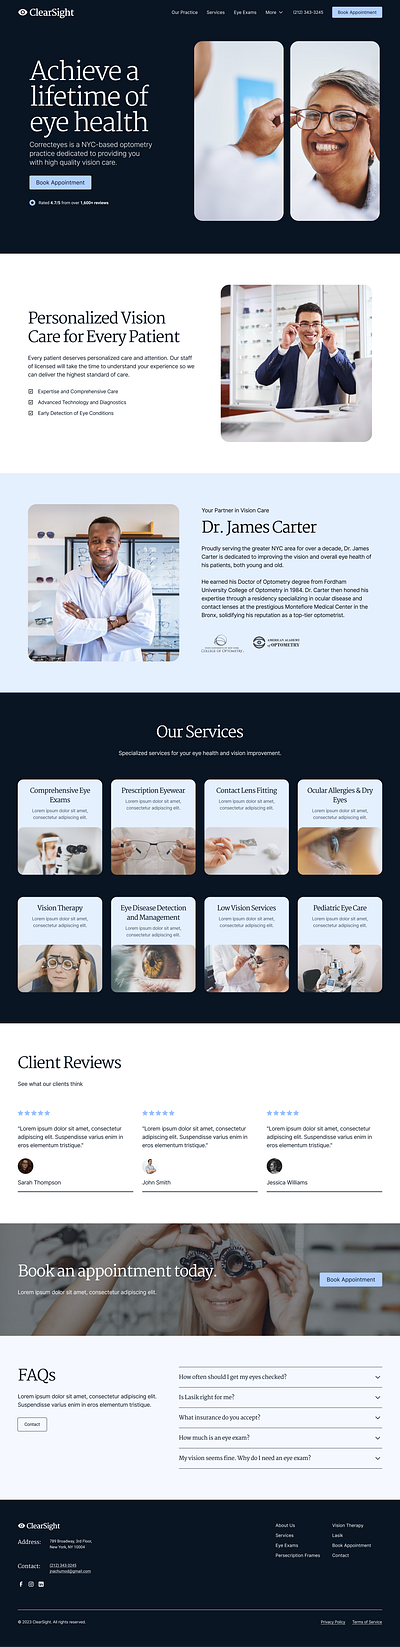 ClearSight - Optometry Practice Homepage design graphic design local business optometrist web design website